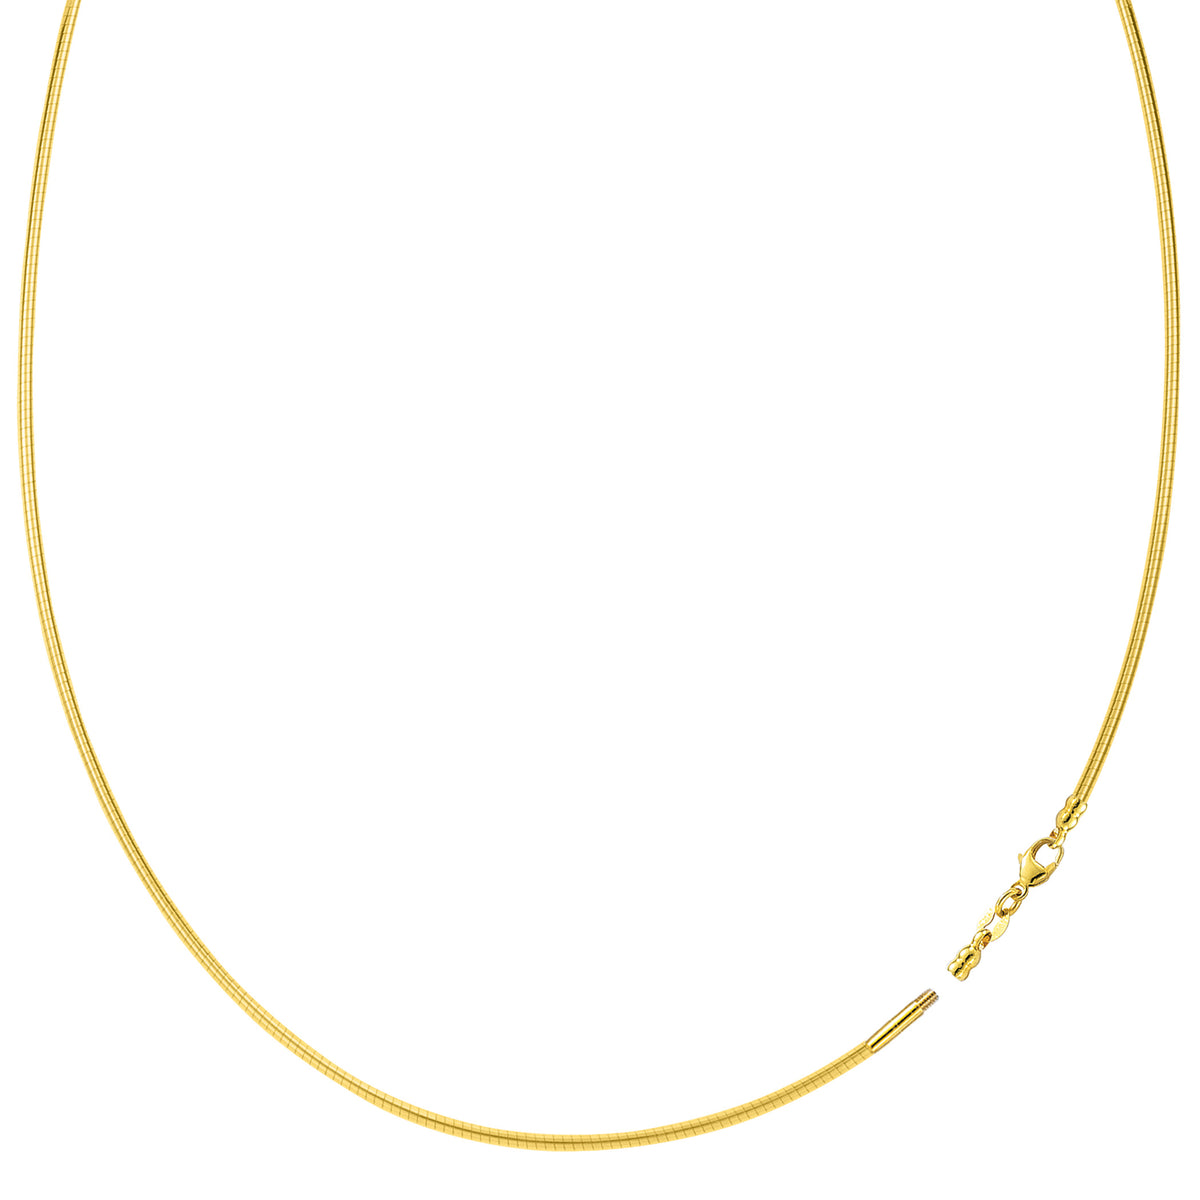 Round Omega Chain Necklace With Screw Off Lock In 14k Yellow Gold